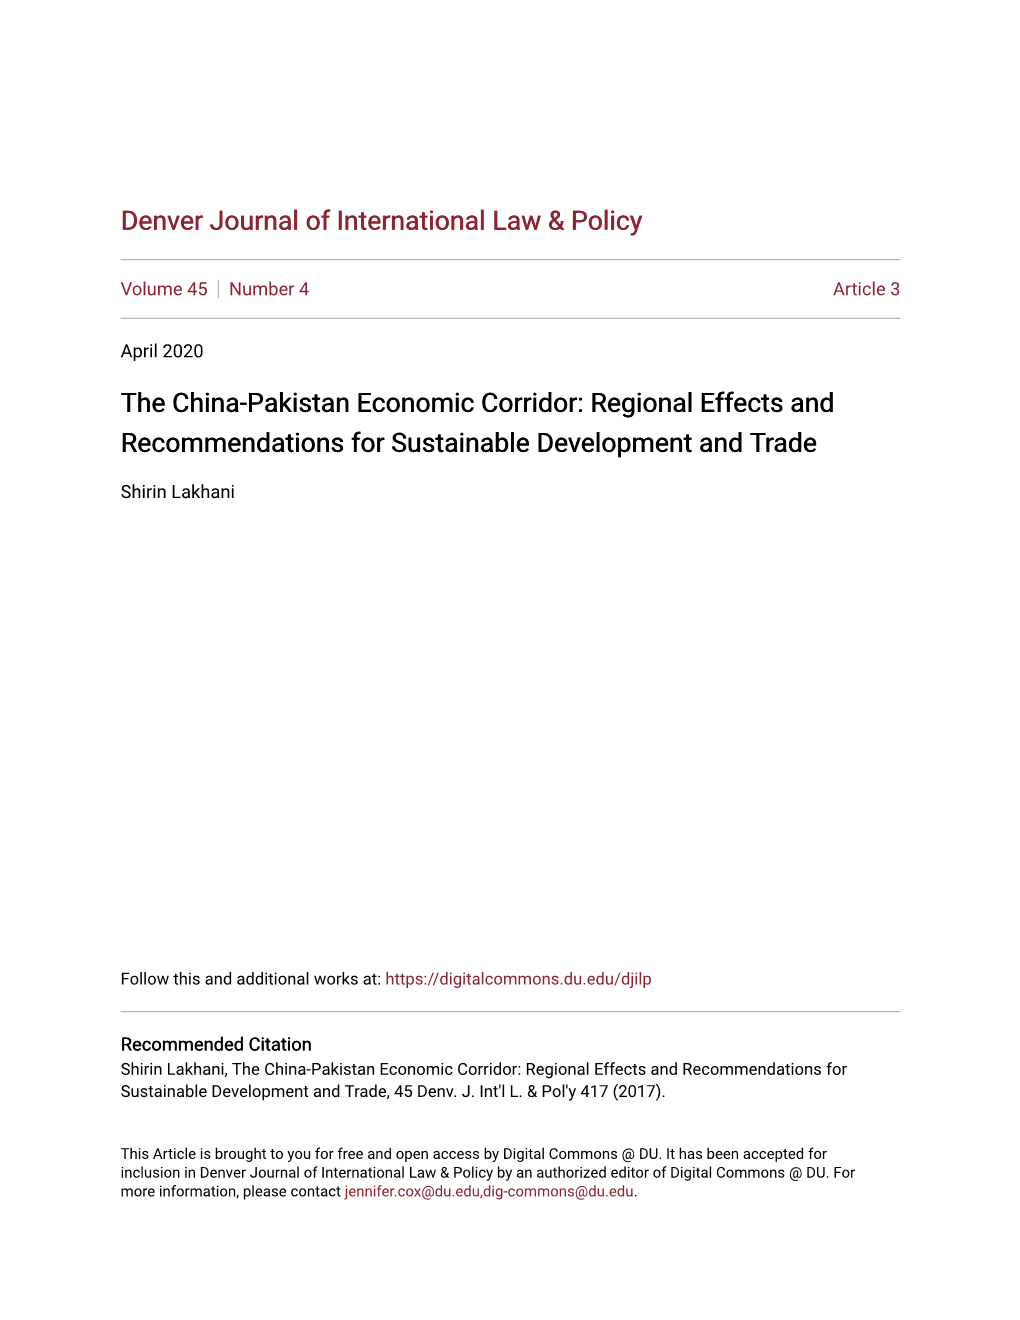 The China-Pakistan Economic Corridor: Regional Effects and Recommendations for Sustainable Development and Trade